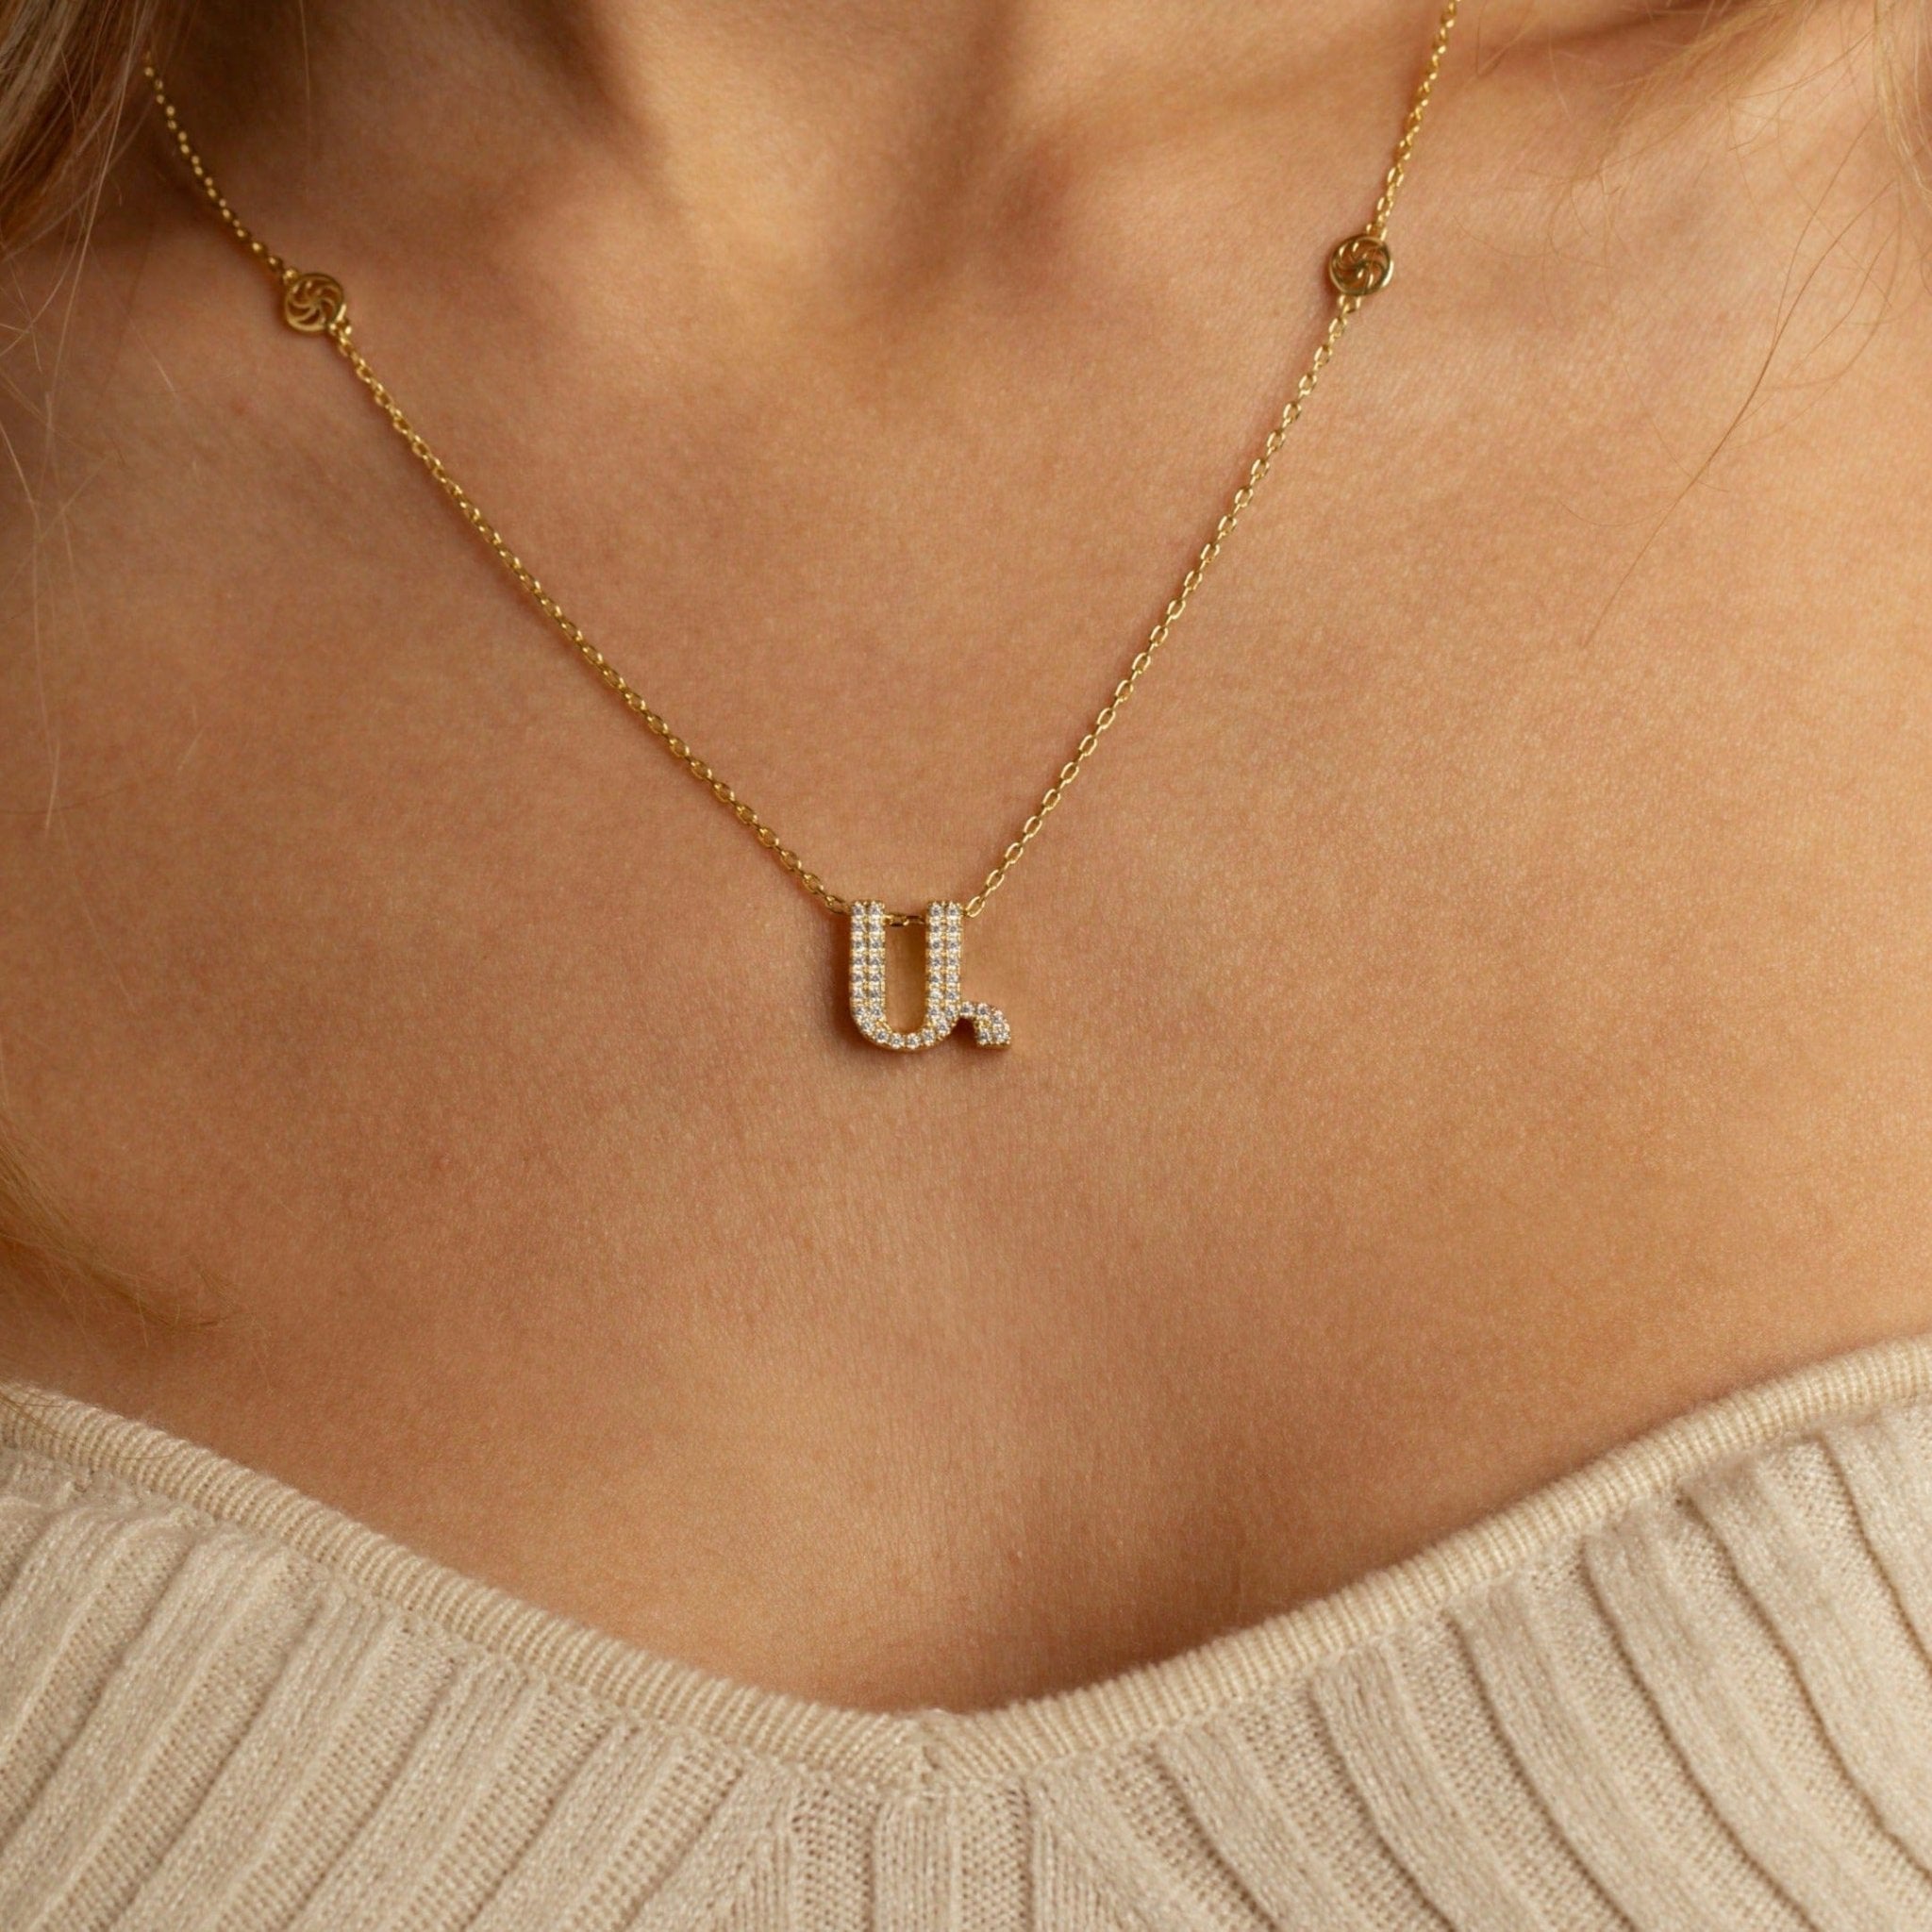 Armenian Initial Necklace Necklaces IceLink-ATL Ա (Ani)  